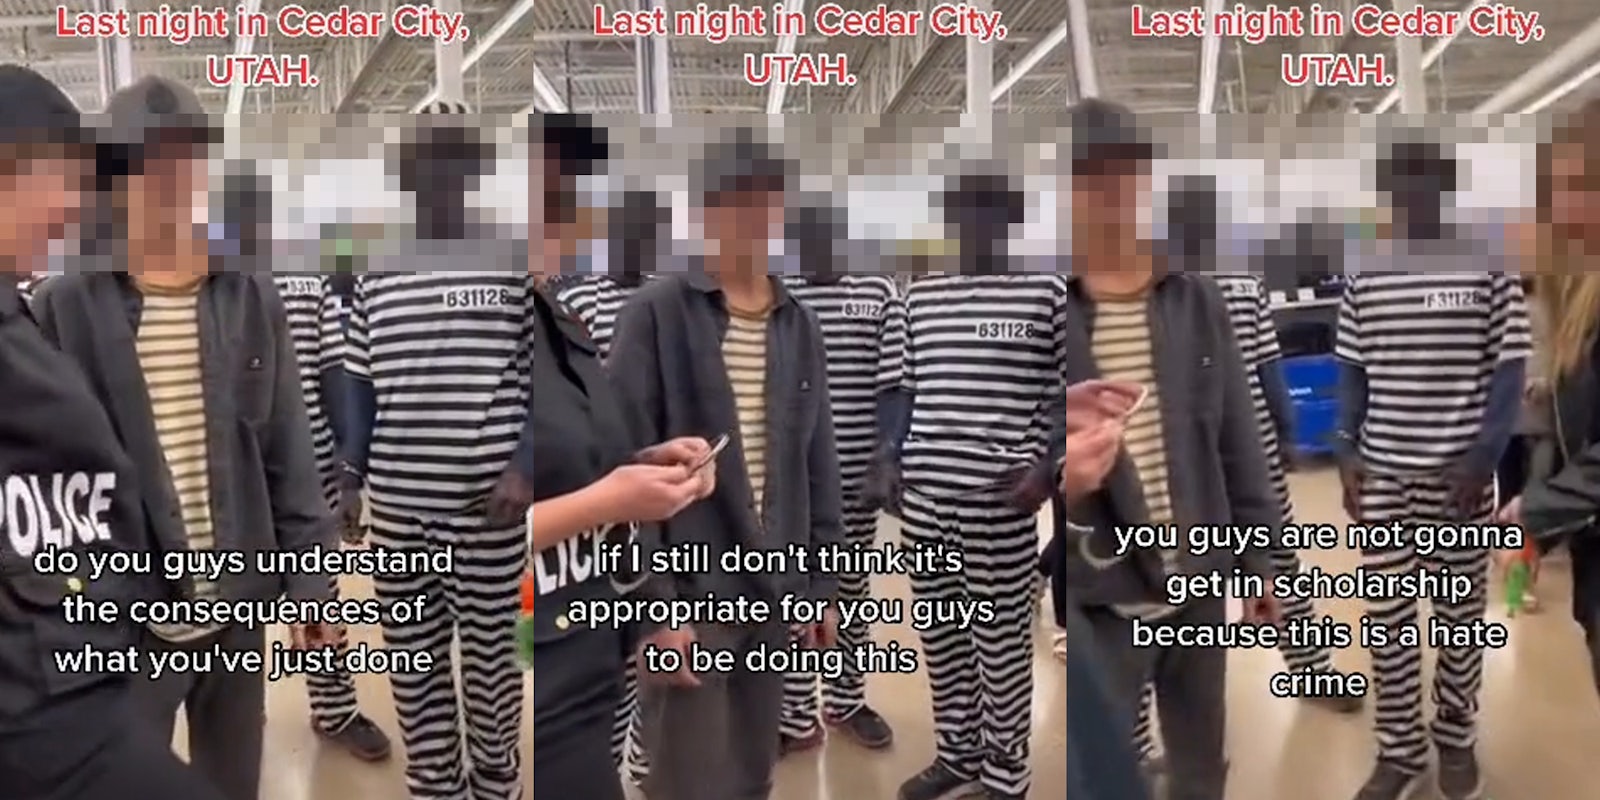 Teenagers at store dressed in blackface as inmates caption 'Last Night in Cedar City, UTAH' 'do you guys understand the consequences of what you've just done' (l) Teenagers at store dressed in blackface as inmates caption 'Last Night in Cedar City, UTAH' 'if I still don't think it's appropriate for you guys to be doing this' (c) Teenagers at store dressed in blackface as inmates caption 'Last Night in Cedar City, UTAH' 'you guys are not gonna get in scholarship because this is a hate crime' (r)